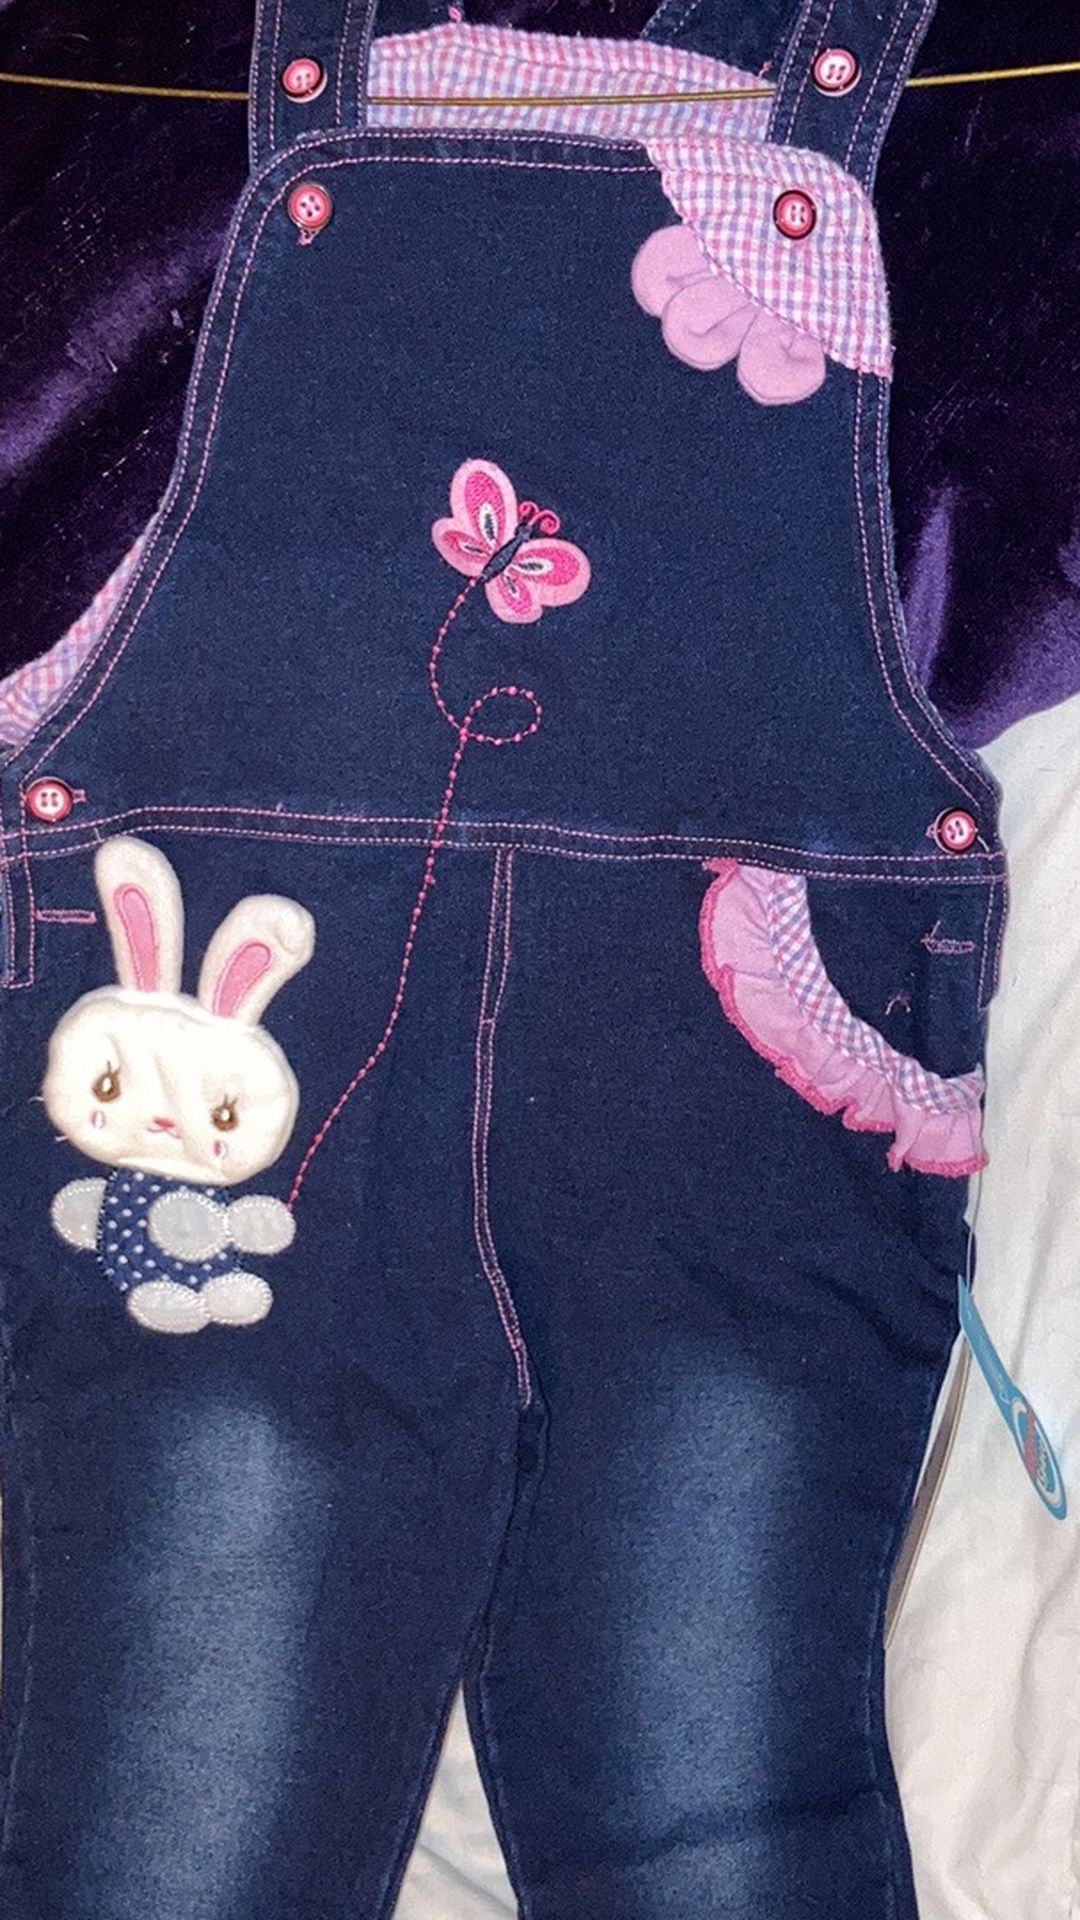 New Bunny bib overalls size 3 to 4 toddler